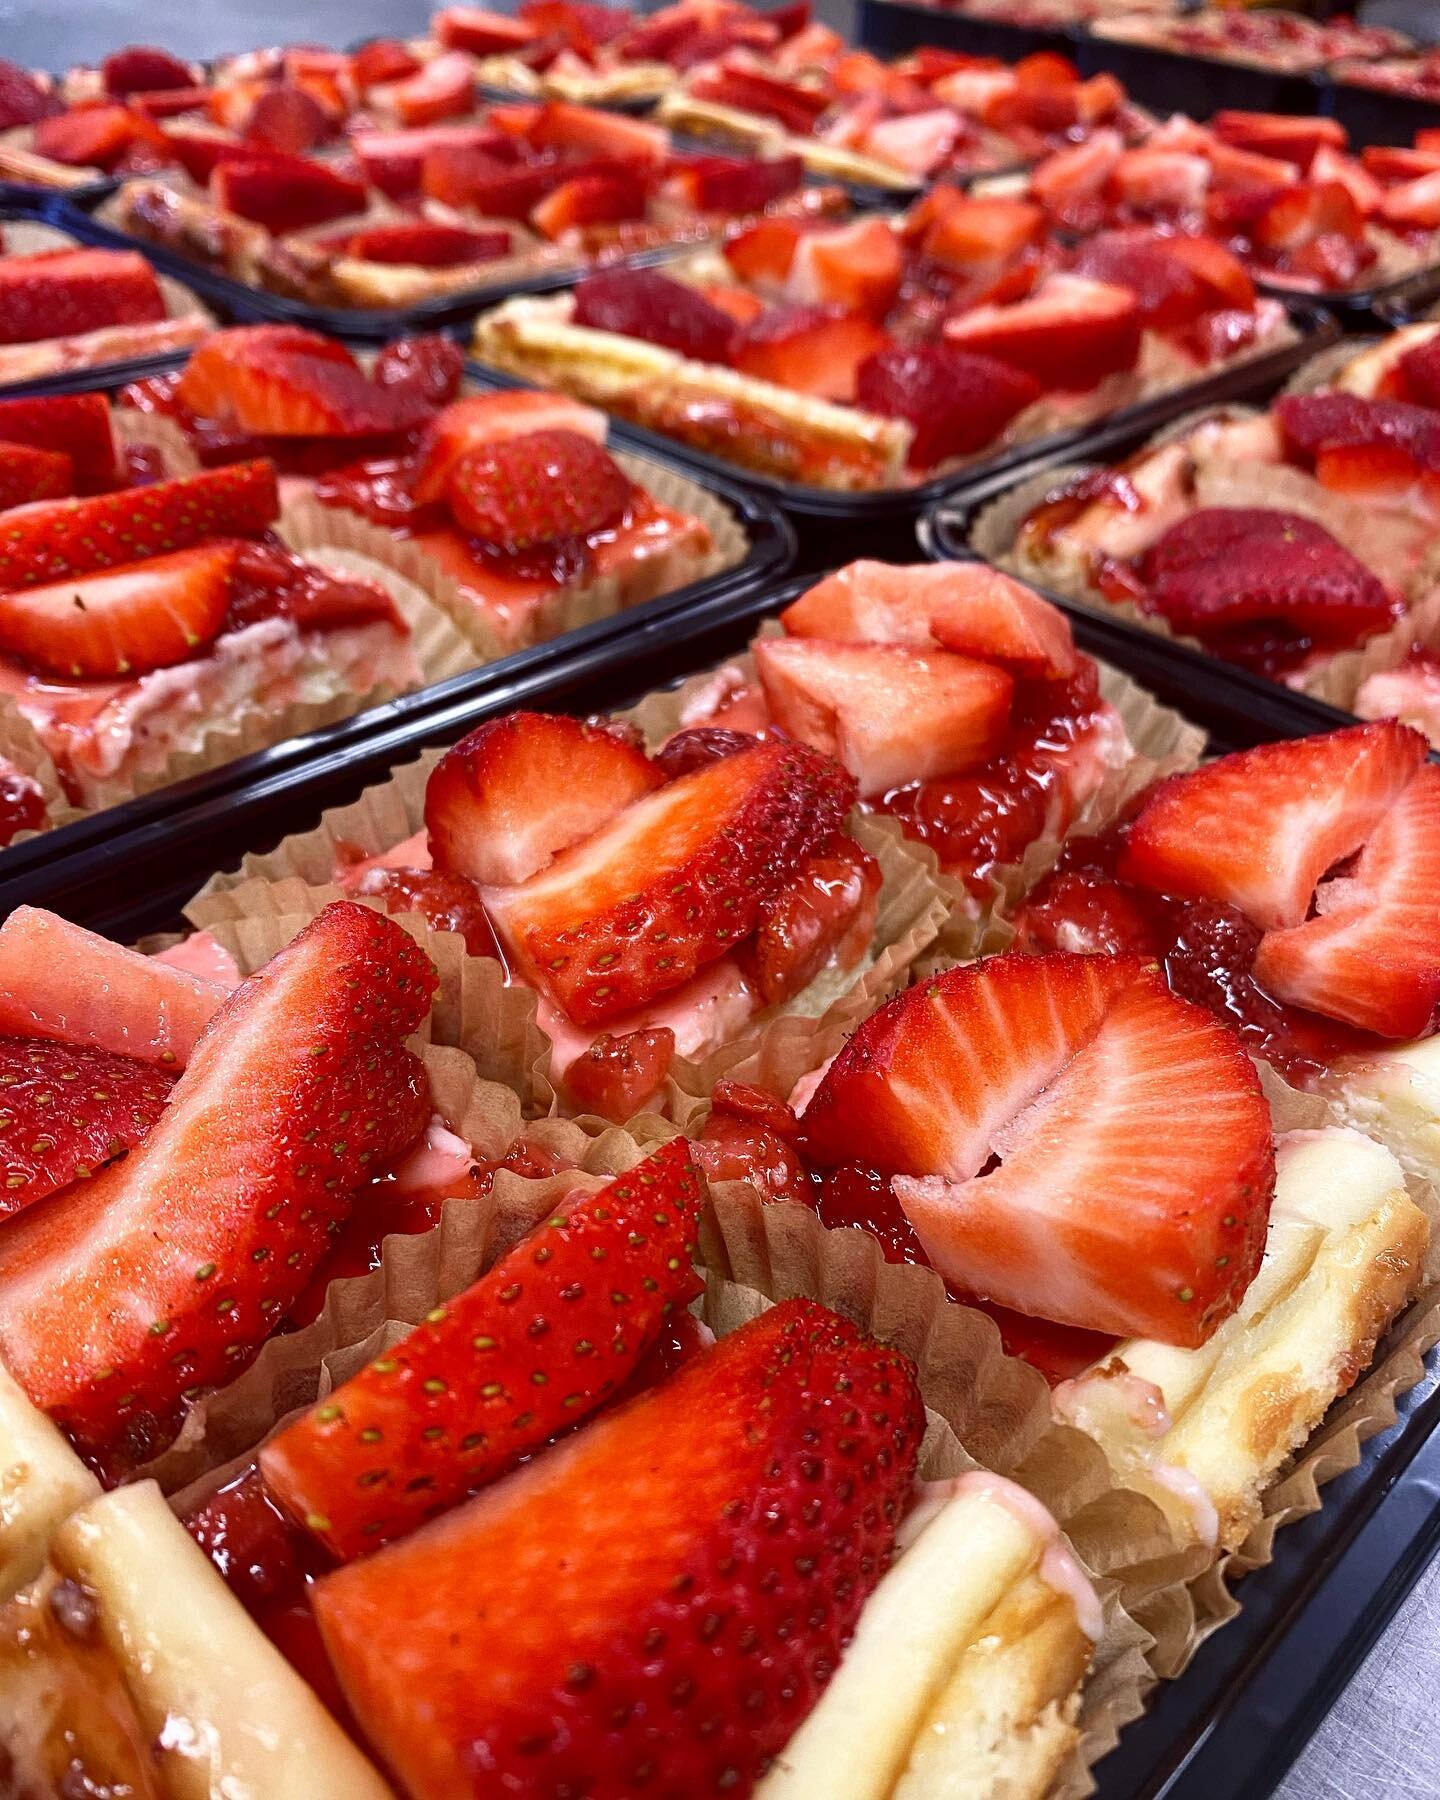 THIS WEEKS FEATURED DESSERT: Fresh Strawberry Cheesecake Bars 🍓🍓🍓

Available in our takeout window this week on a first come, first serve basis. We will only have a limited amount each day, so come early to get yours!

Thank you all for your conti